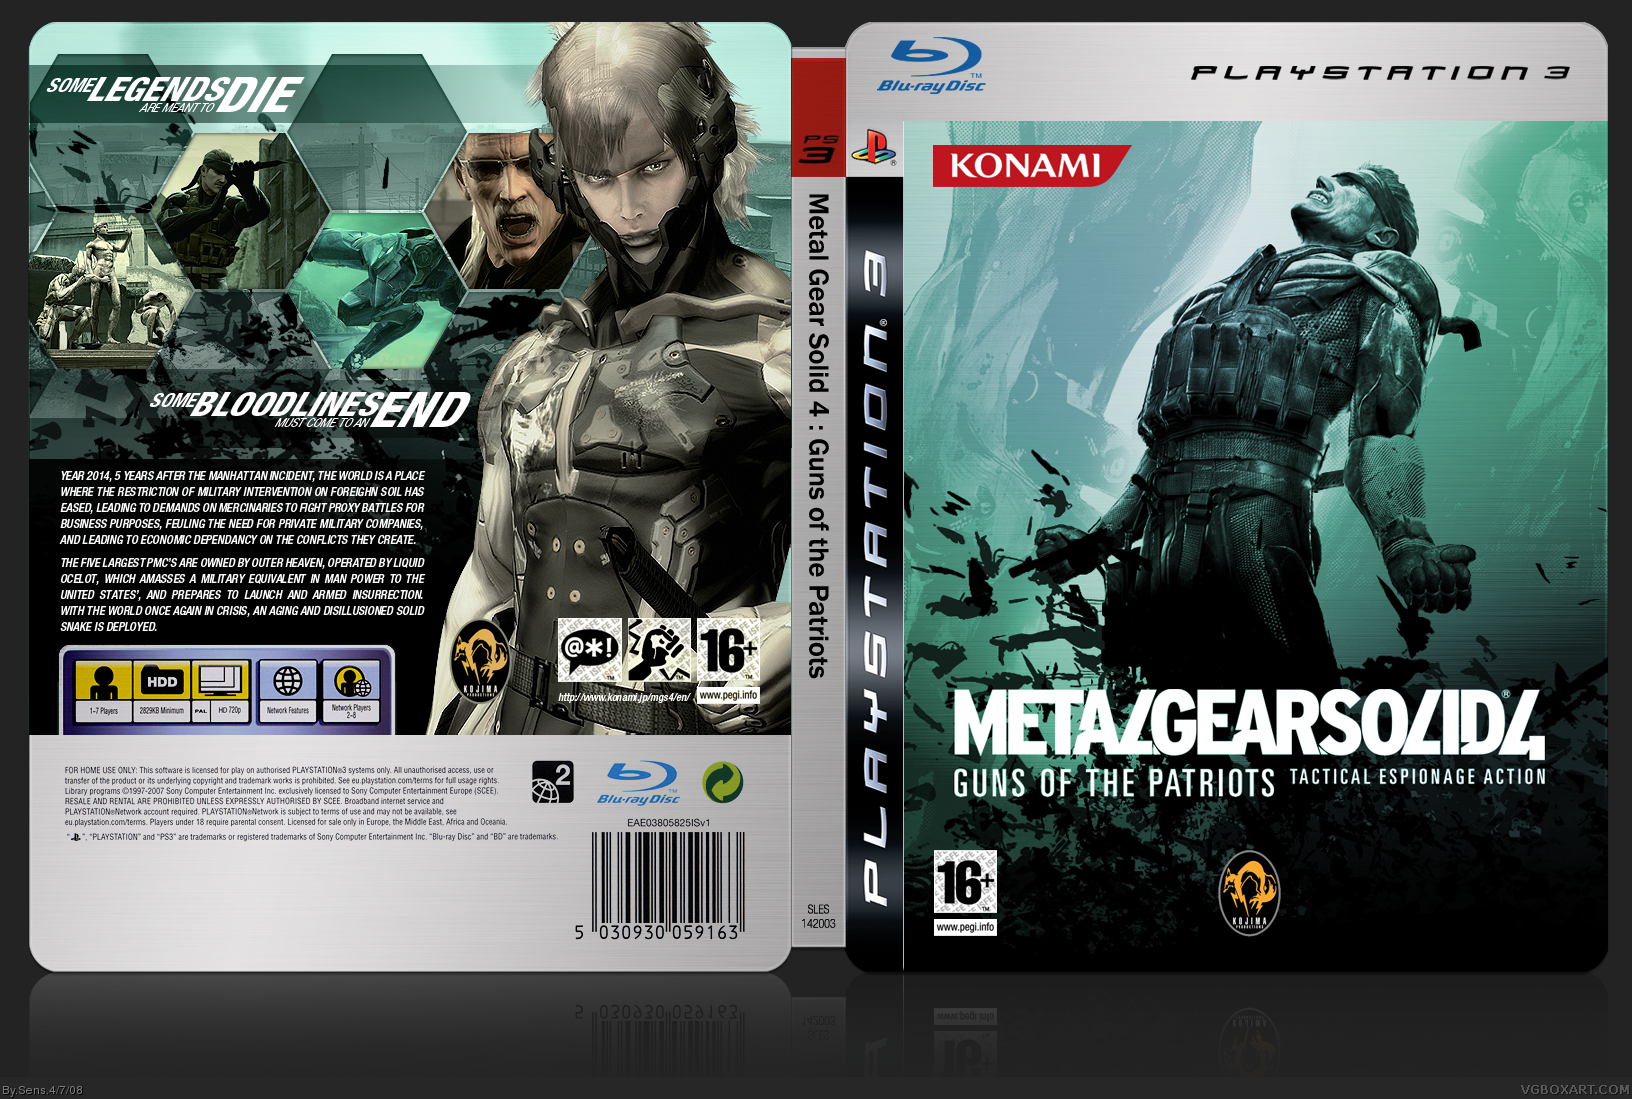 Metal Gear Solid 4: Guns of the Patriots box cover